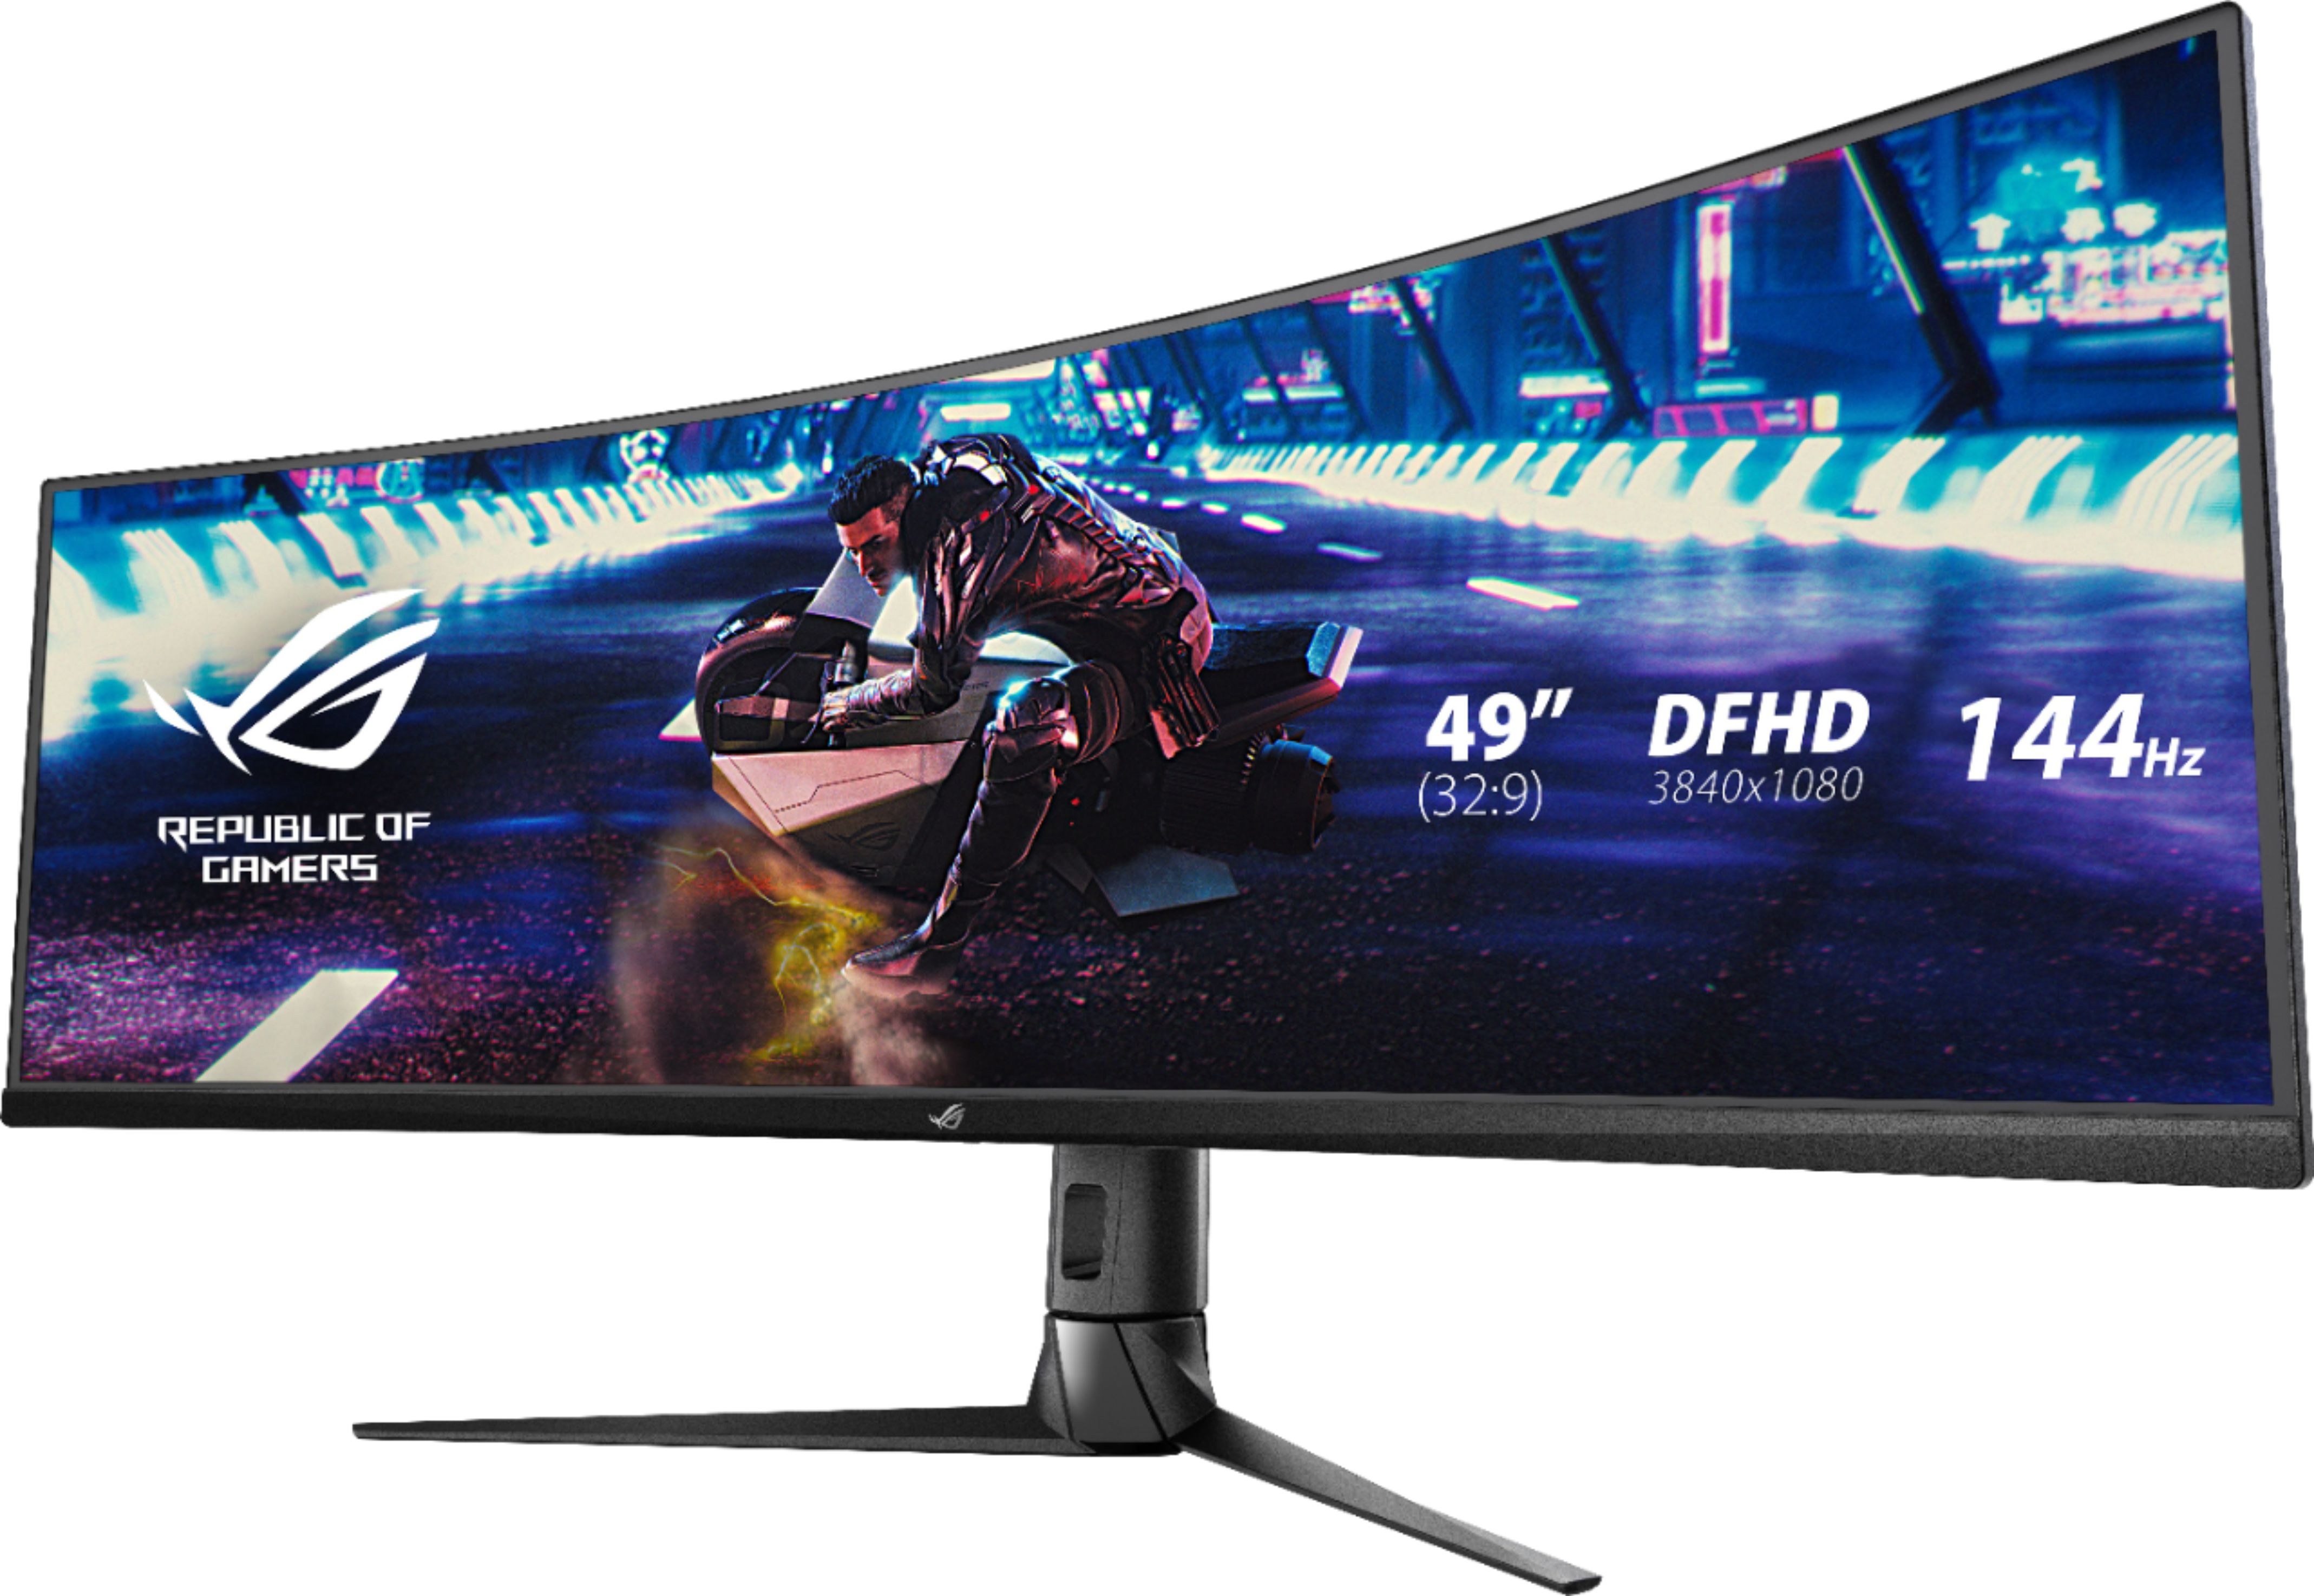 That Asus 500Hz gaming monitor isn't for us